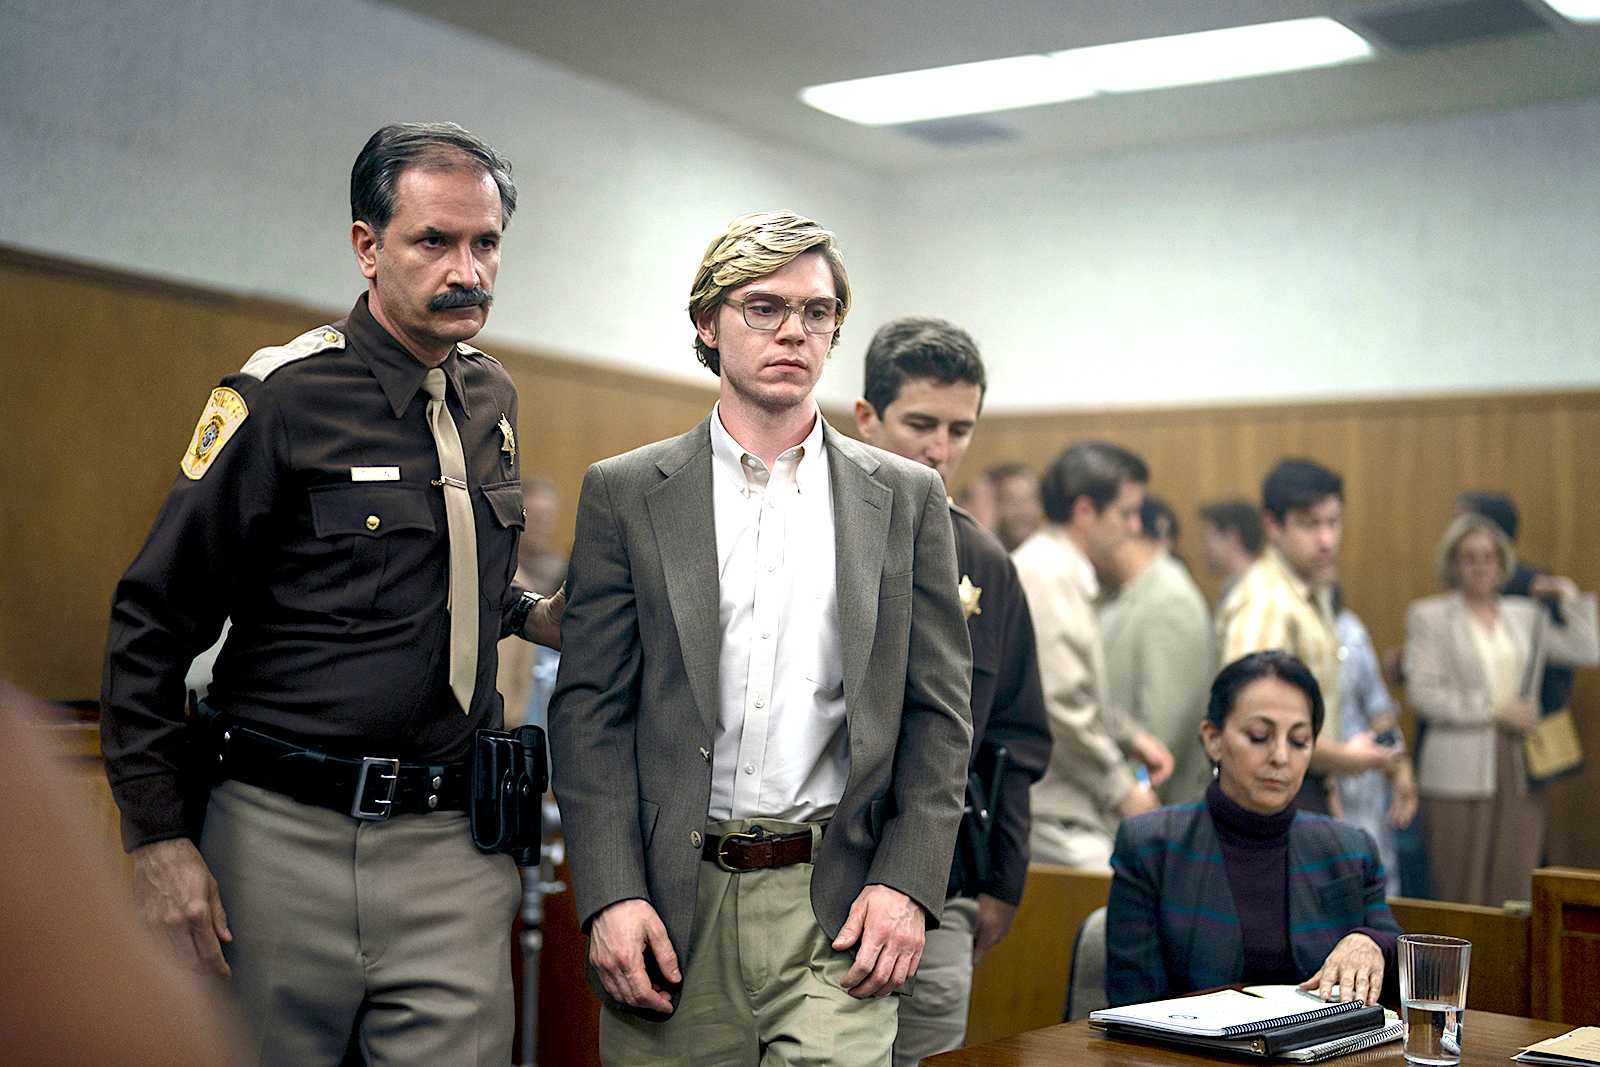 Jeffrey Dahmer: Who was Jeffrey Dahmer? 5 creepy facts about bloodthirsty  protagonist of Netflix's gory serial killer crime drama - The Economic Times